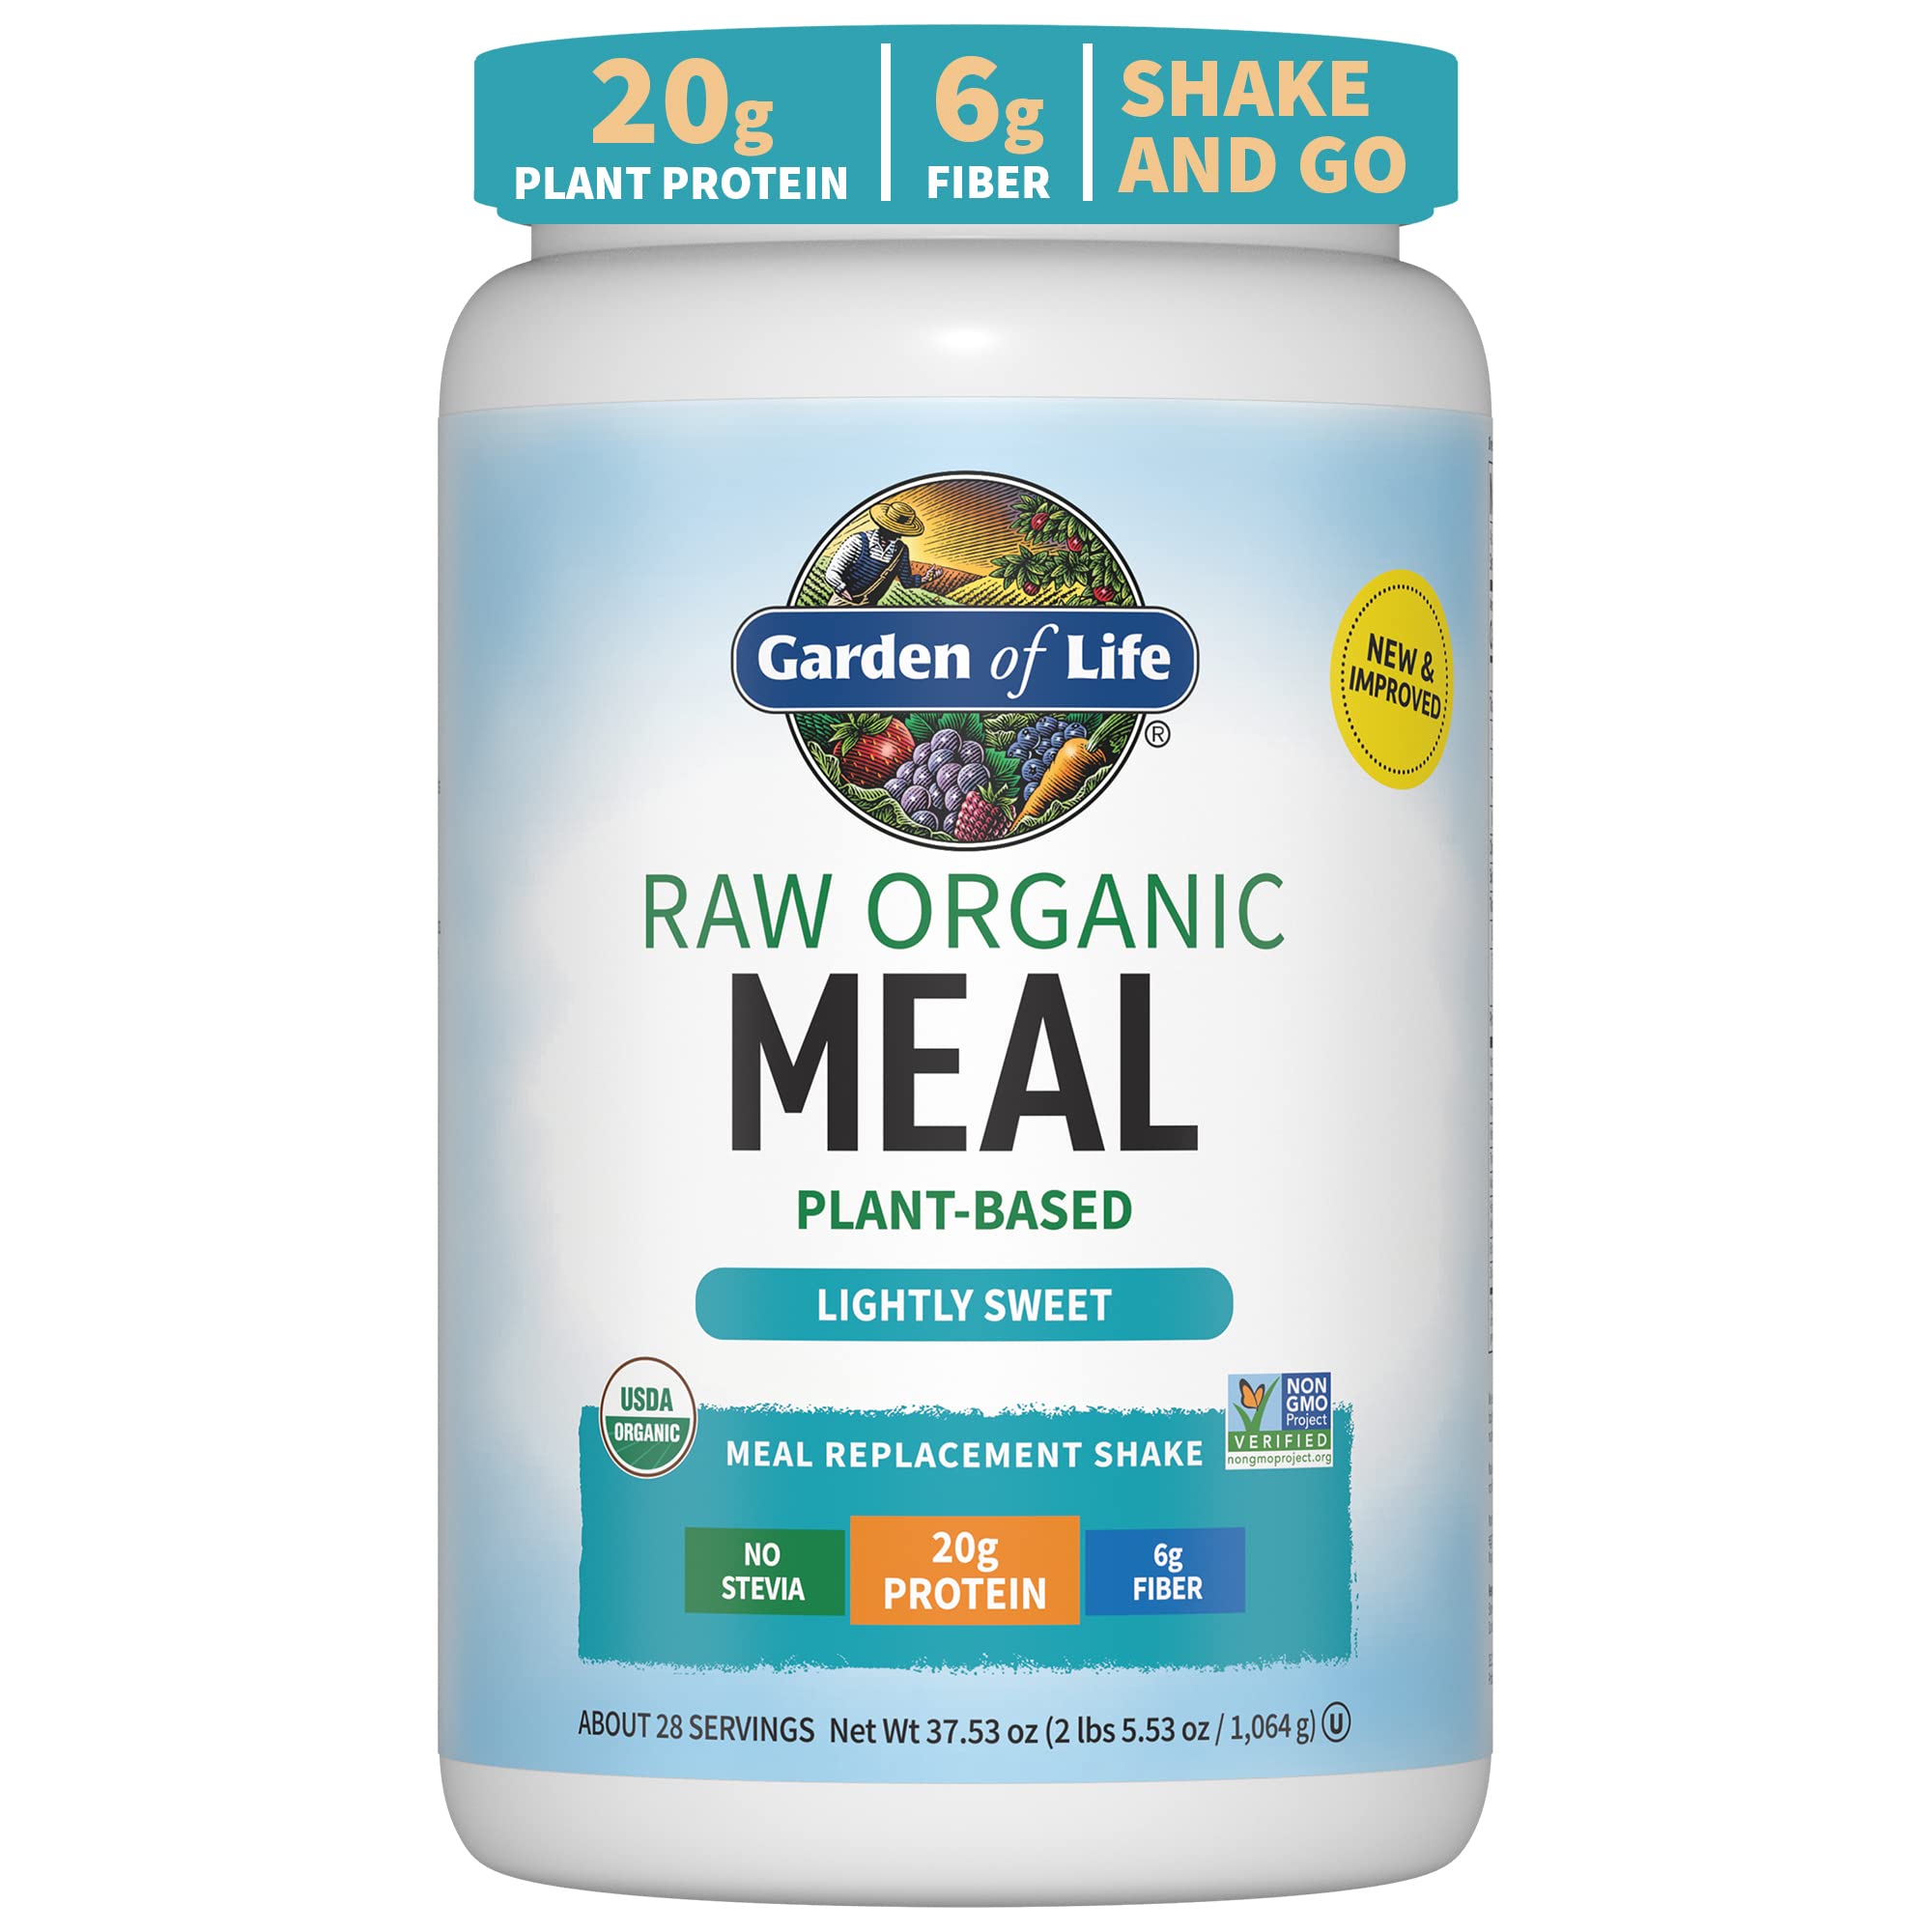 Garden of Life Tasty Organic Lightly Sweet Meal Replacement Shake Vegan - 20g Complete Plant Based Protein, Greens, Rice Protein, Pro & Prebiotics for Easy Digestion, Non-GMO Gluten-Free, 2.4 LB